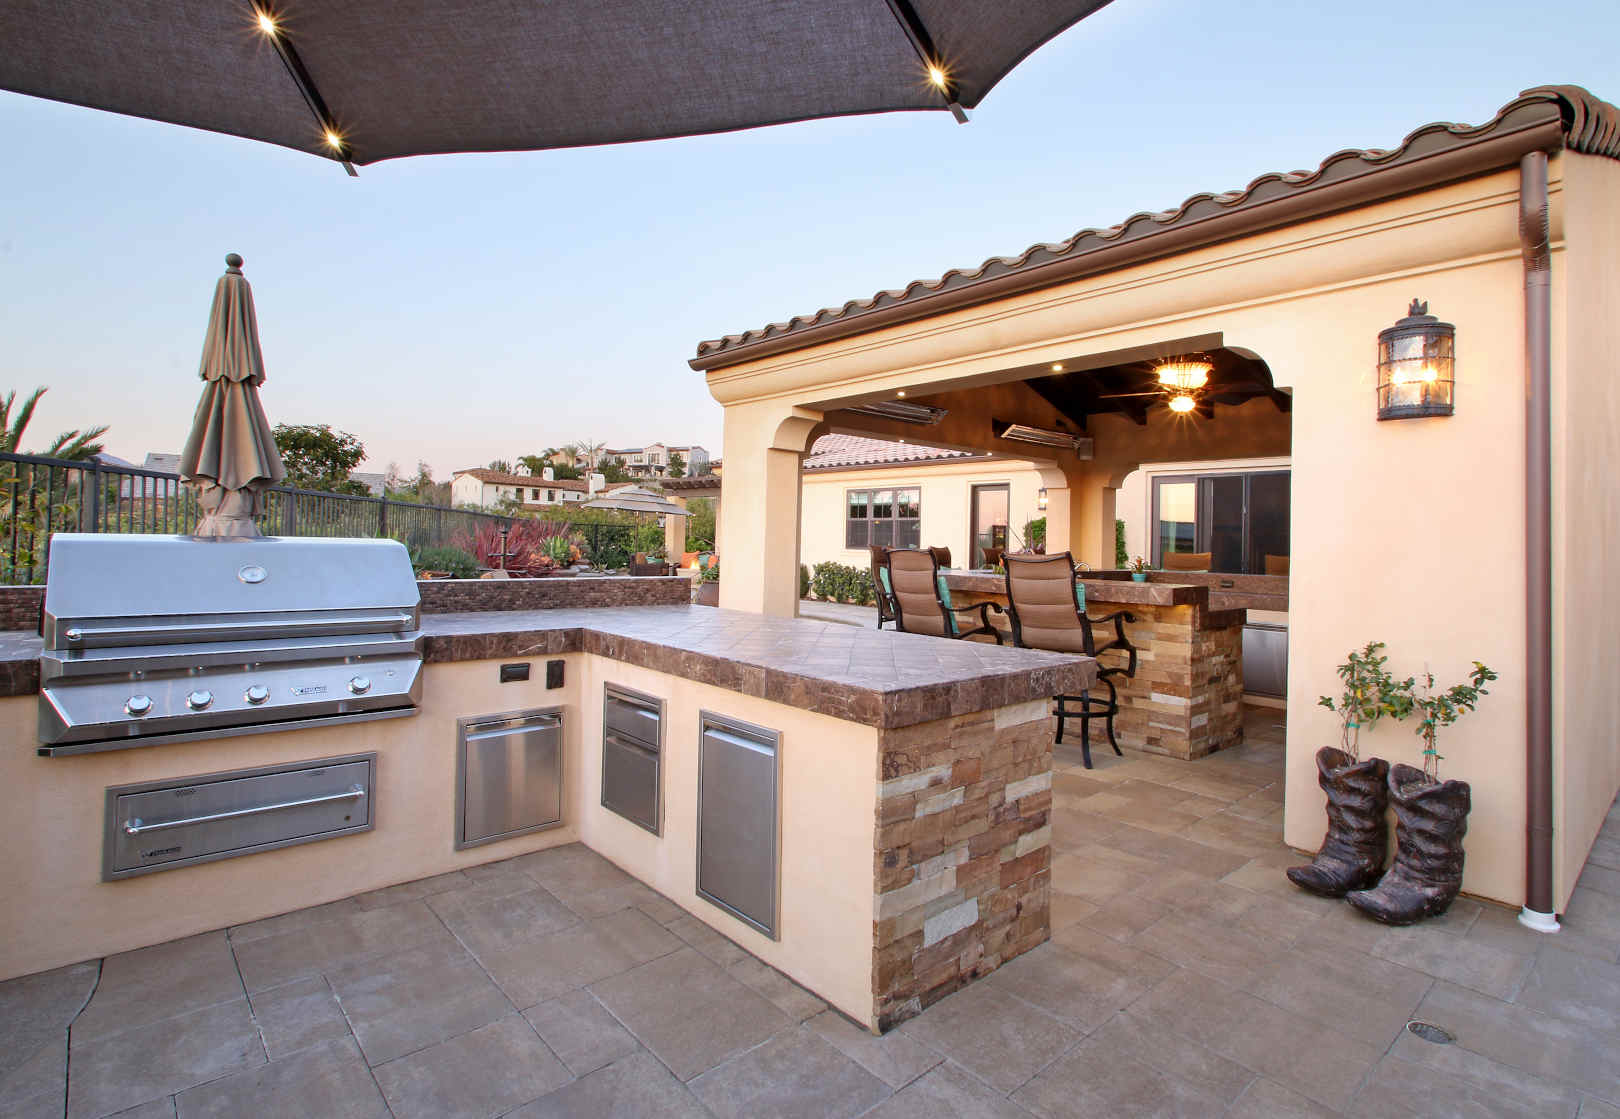 Custom built in barbeque and loggia with sitting area, Dreamscape by MGR leading pool contractor in Orange County